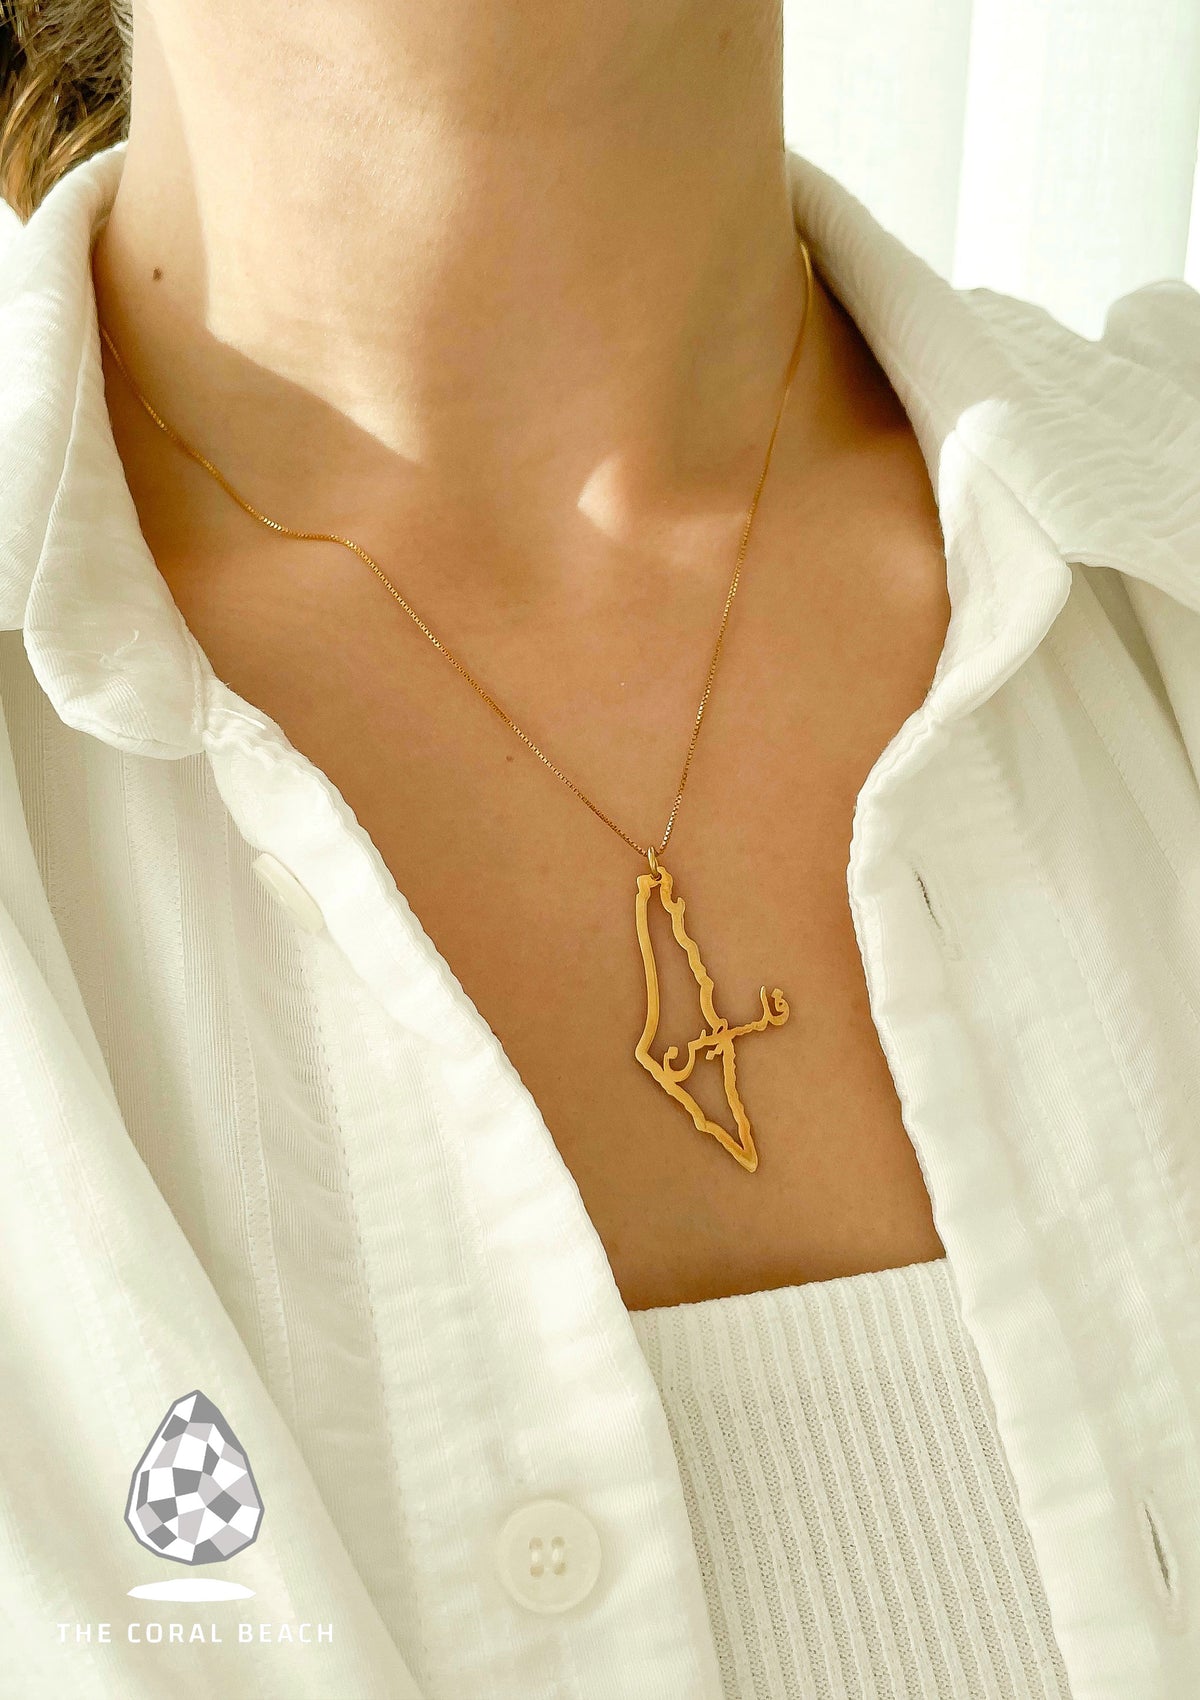 Palestinian map with horizontal Palestine Arabic word necklace